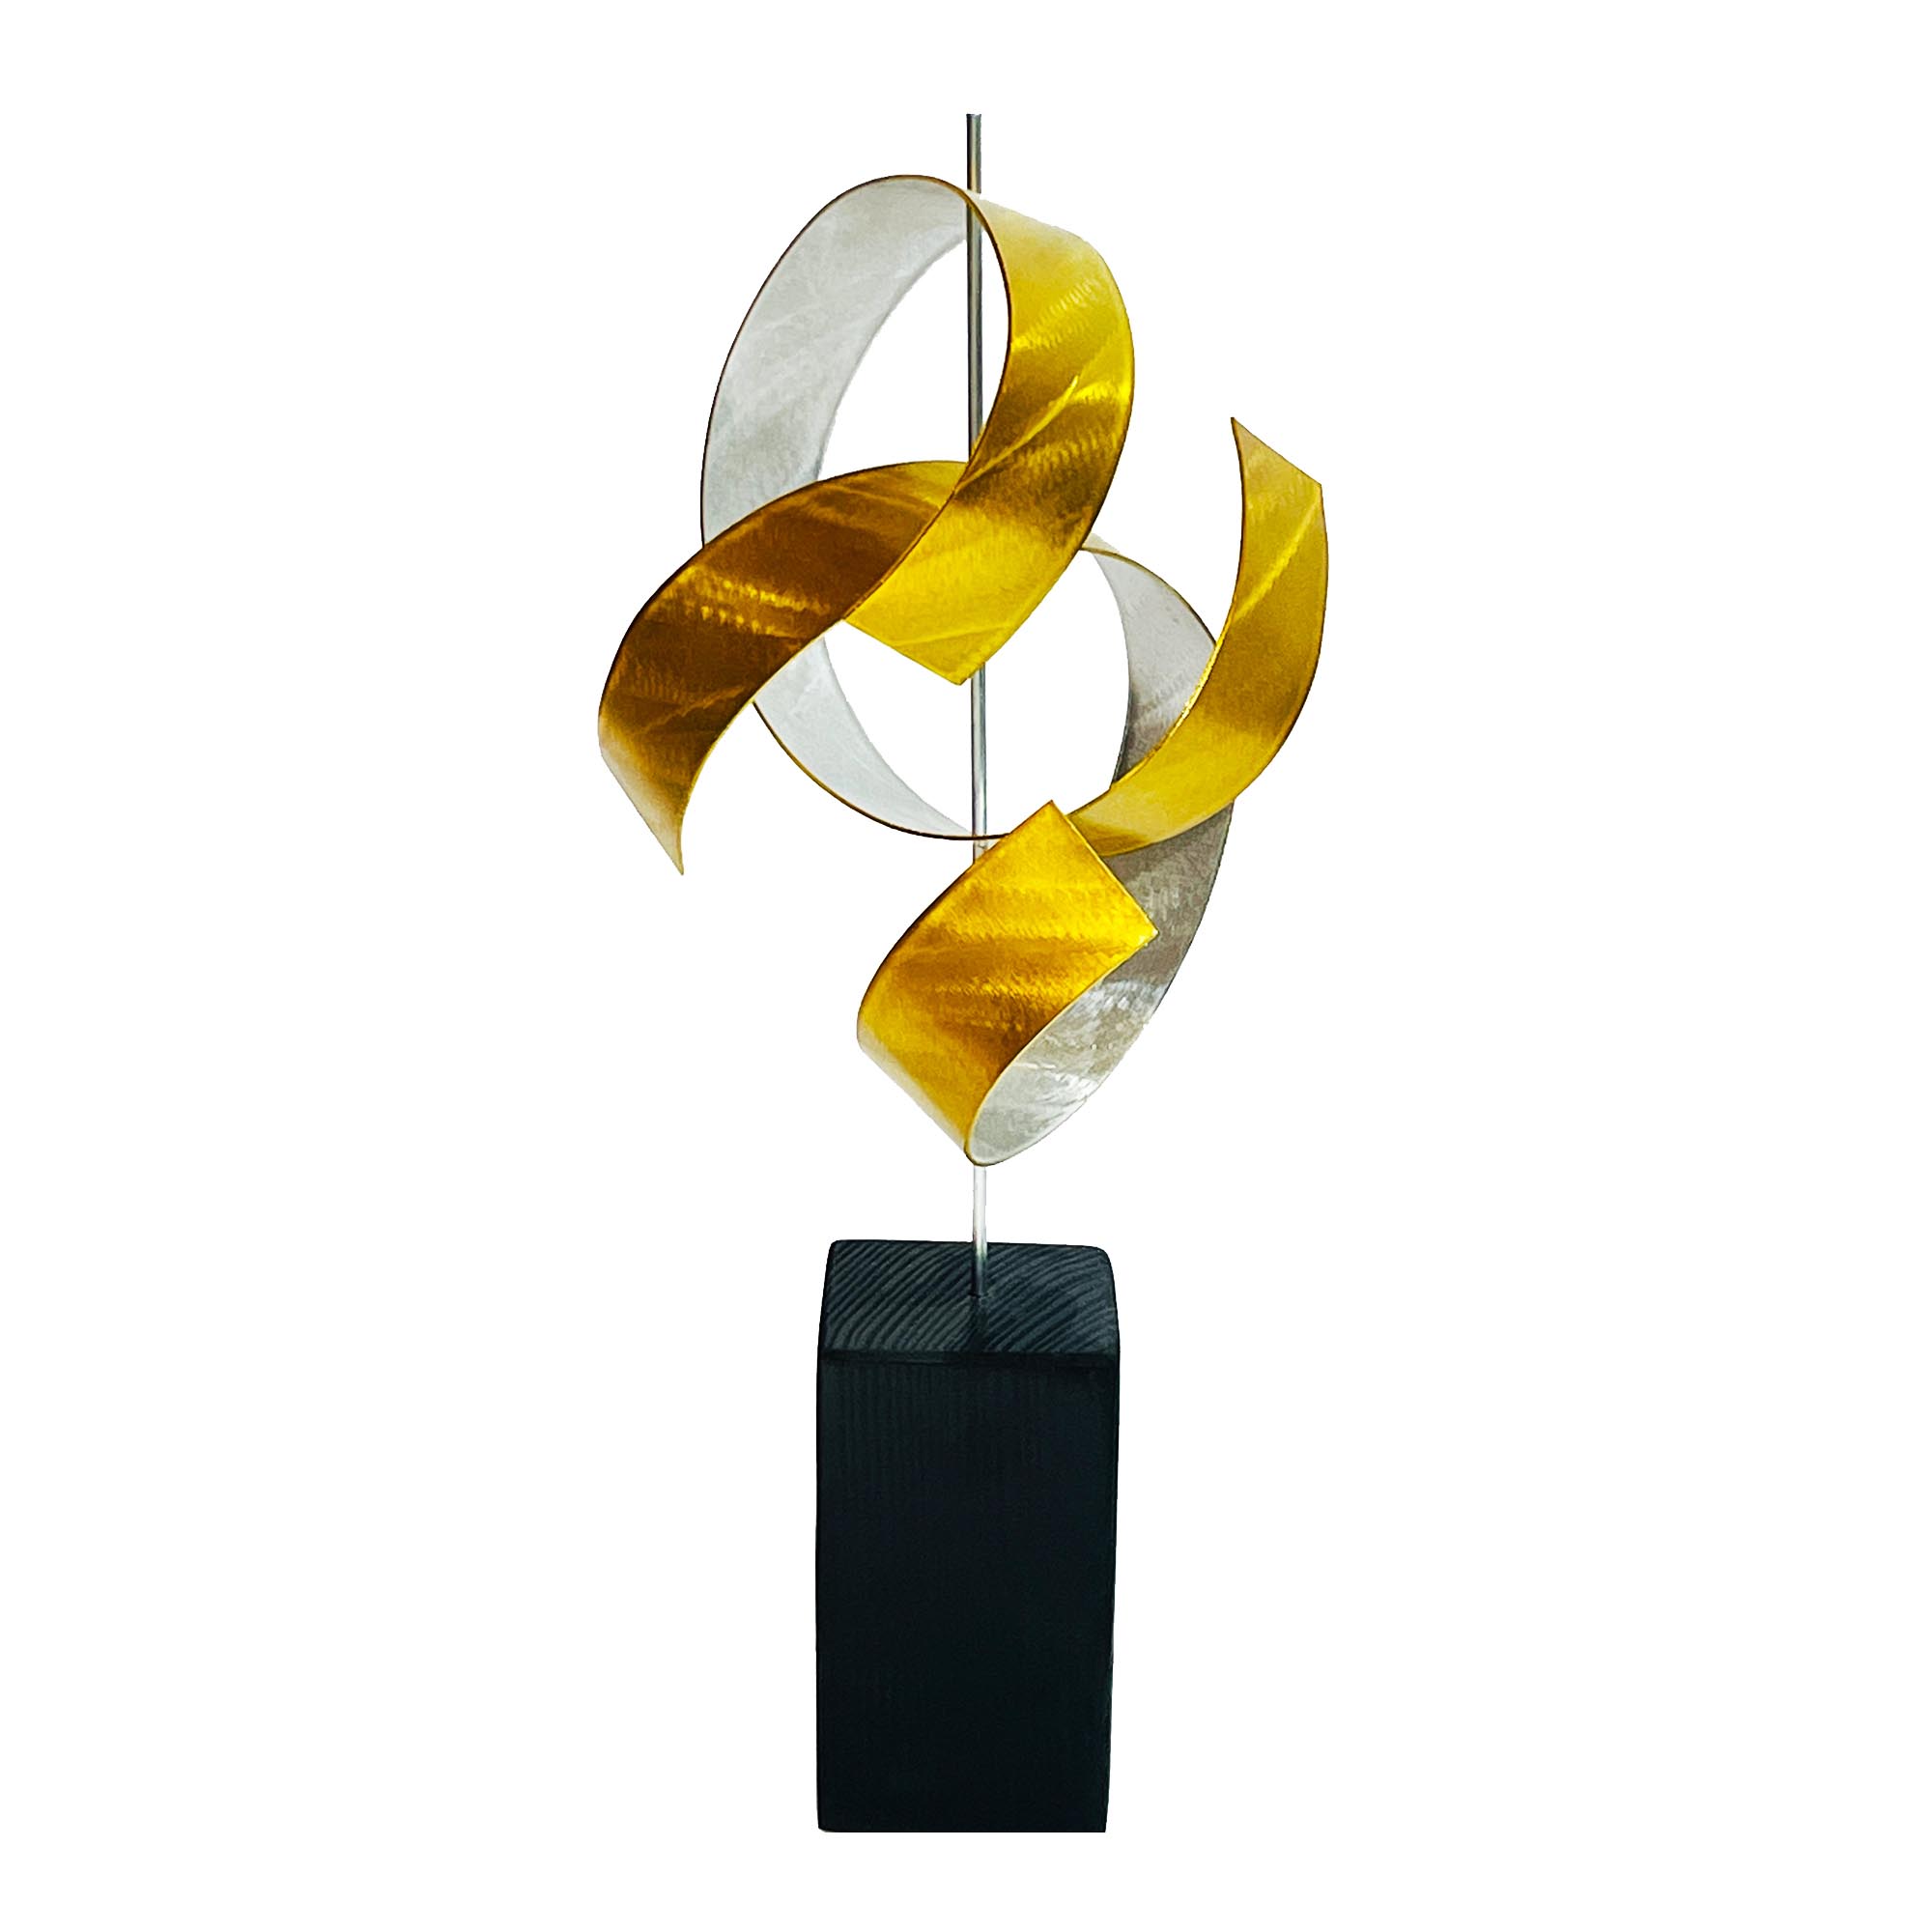 Jackson Wright 'Rings Gold Black' 10in x 23in Contemporary Style Abstract Wood Sculpture